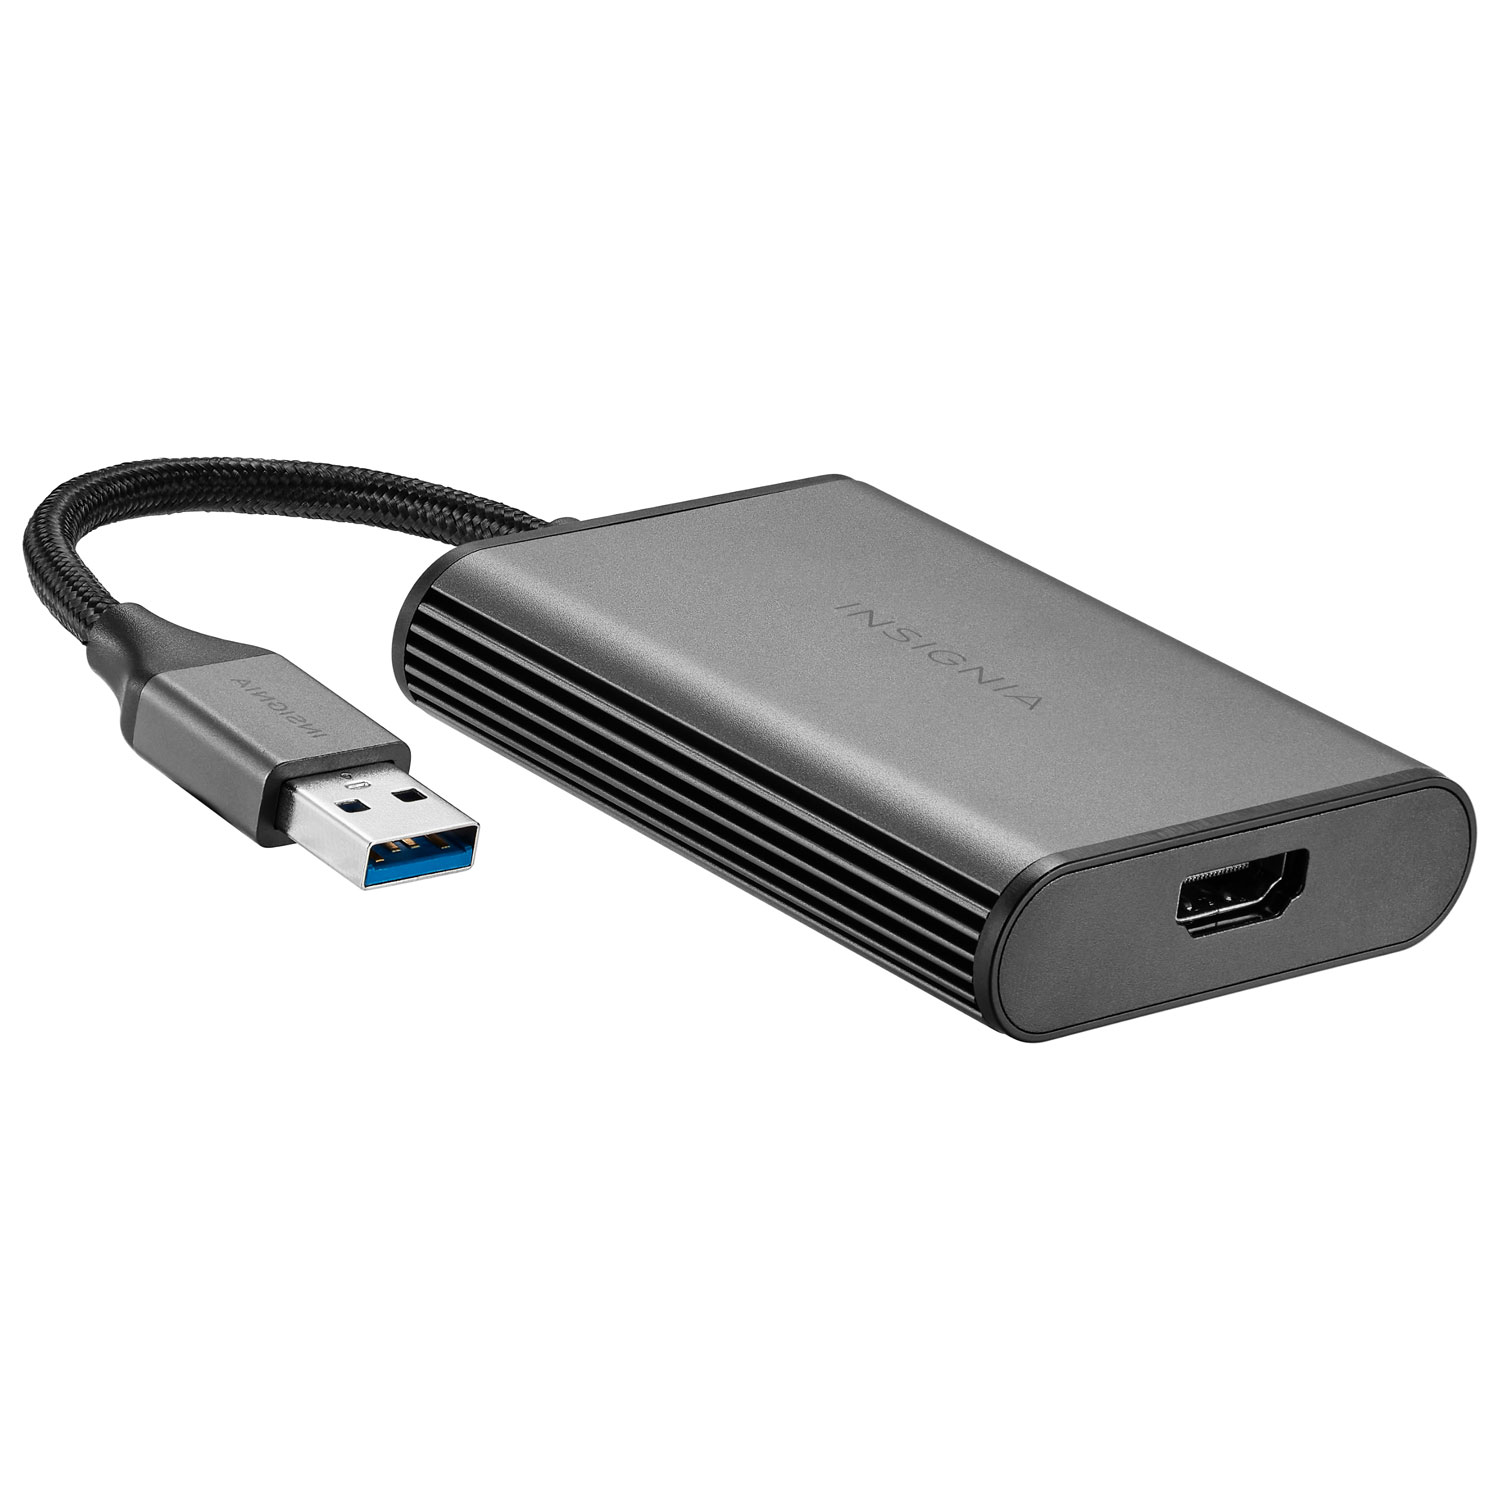 Insignia™ SuperSpeed USB 3.0 to HDMI External Video Adapter Black  NS-PU37H-BK - Best Buy